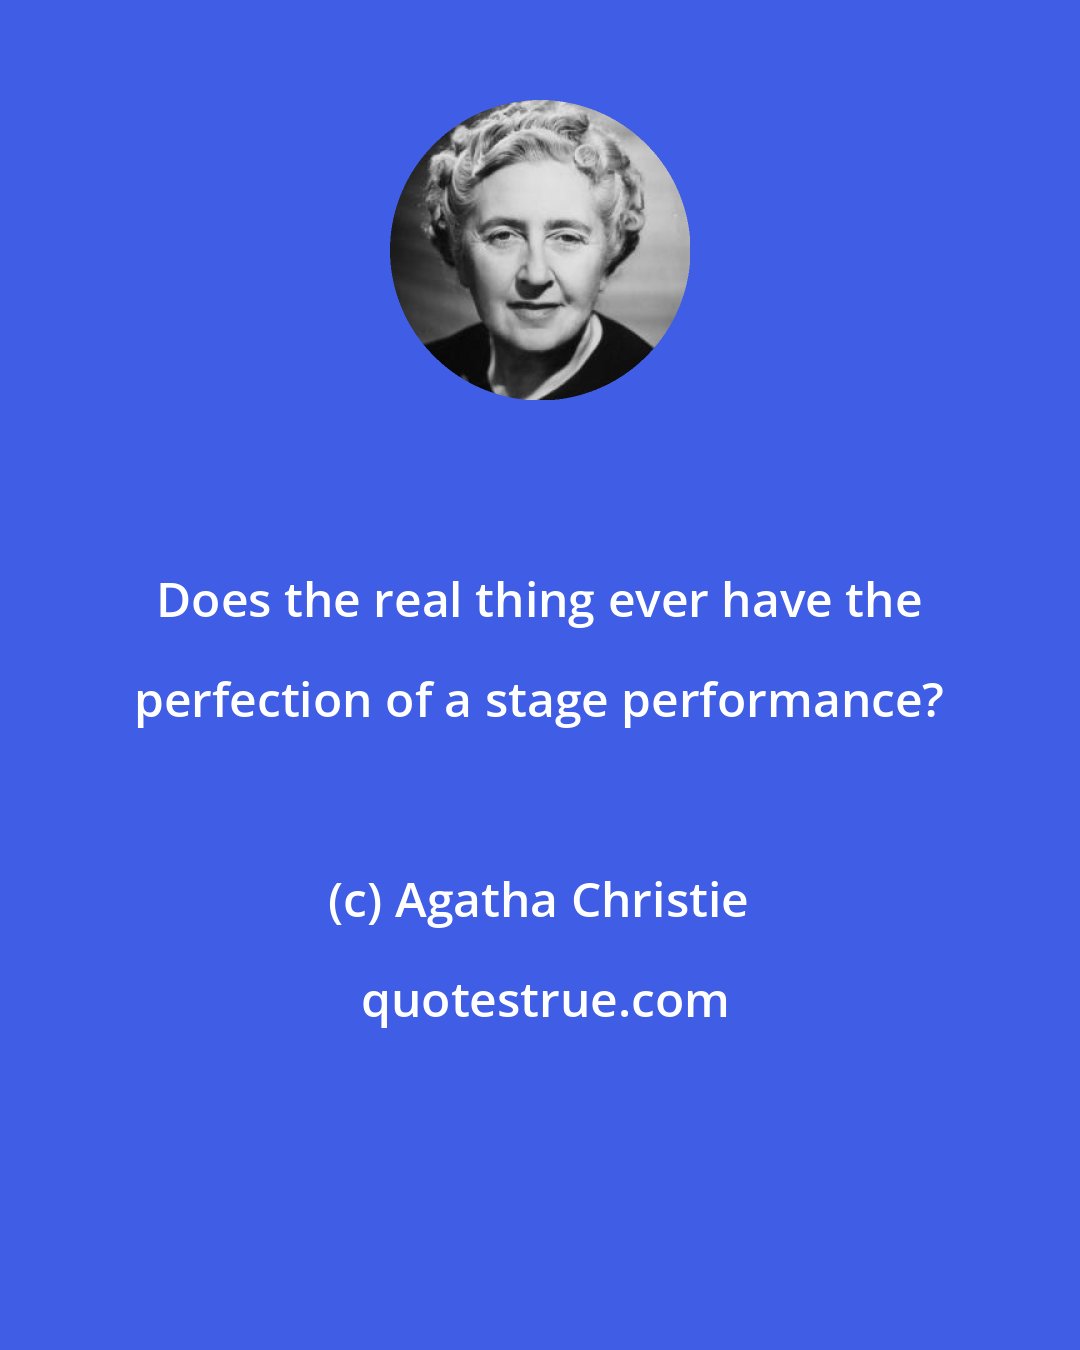 Agatha Christie: Does the real thing ever have the perfection of a stage performance?